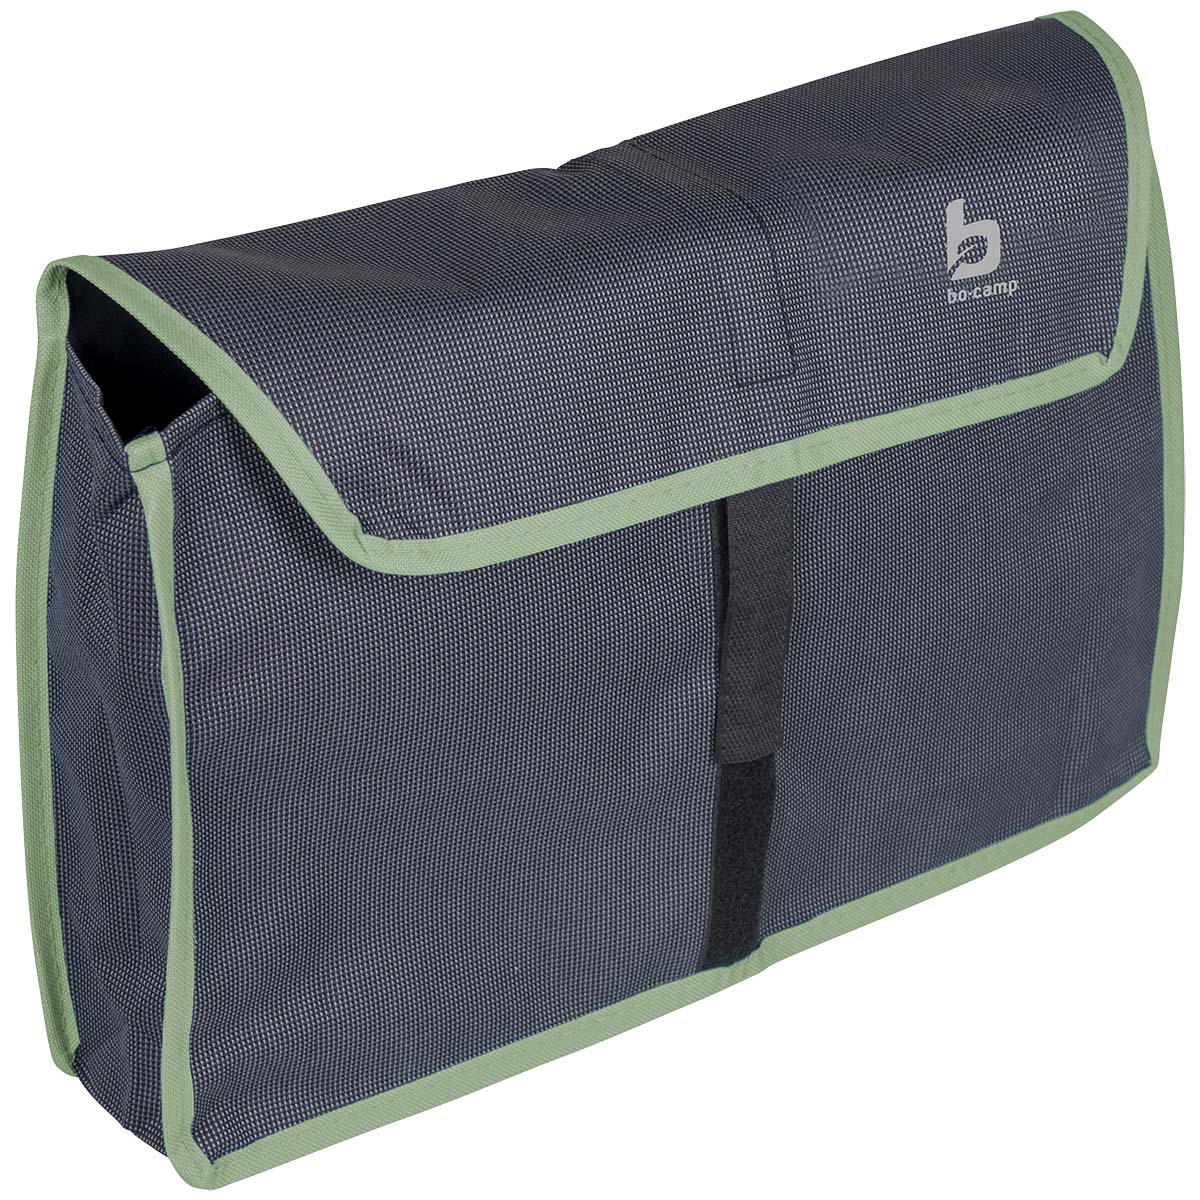 4114985 Peg bag with velcro closure. Material: Two-Tone 600D Oxford Polyester. Dimensions: length 9cm, width 40cm and height 25cm. Colour: anthracite